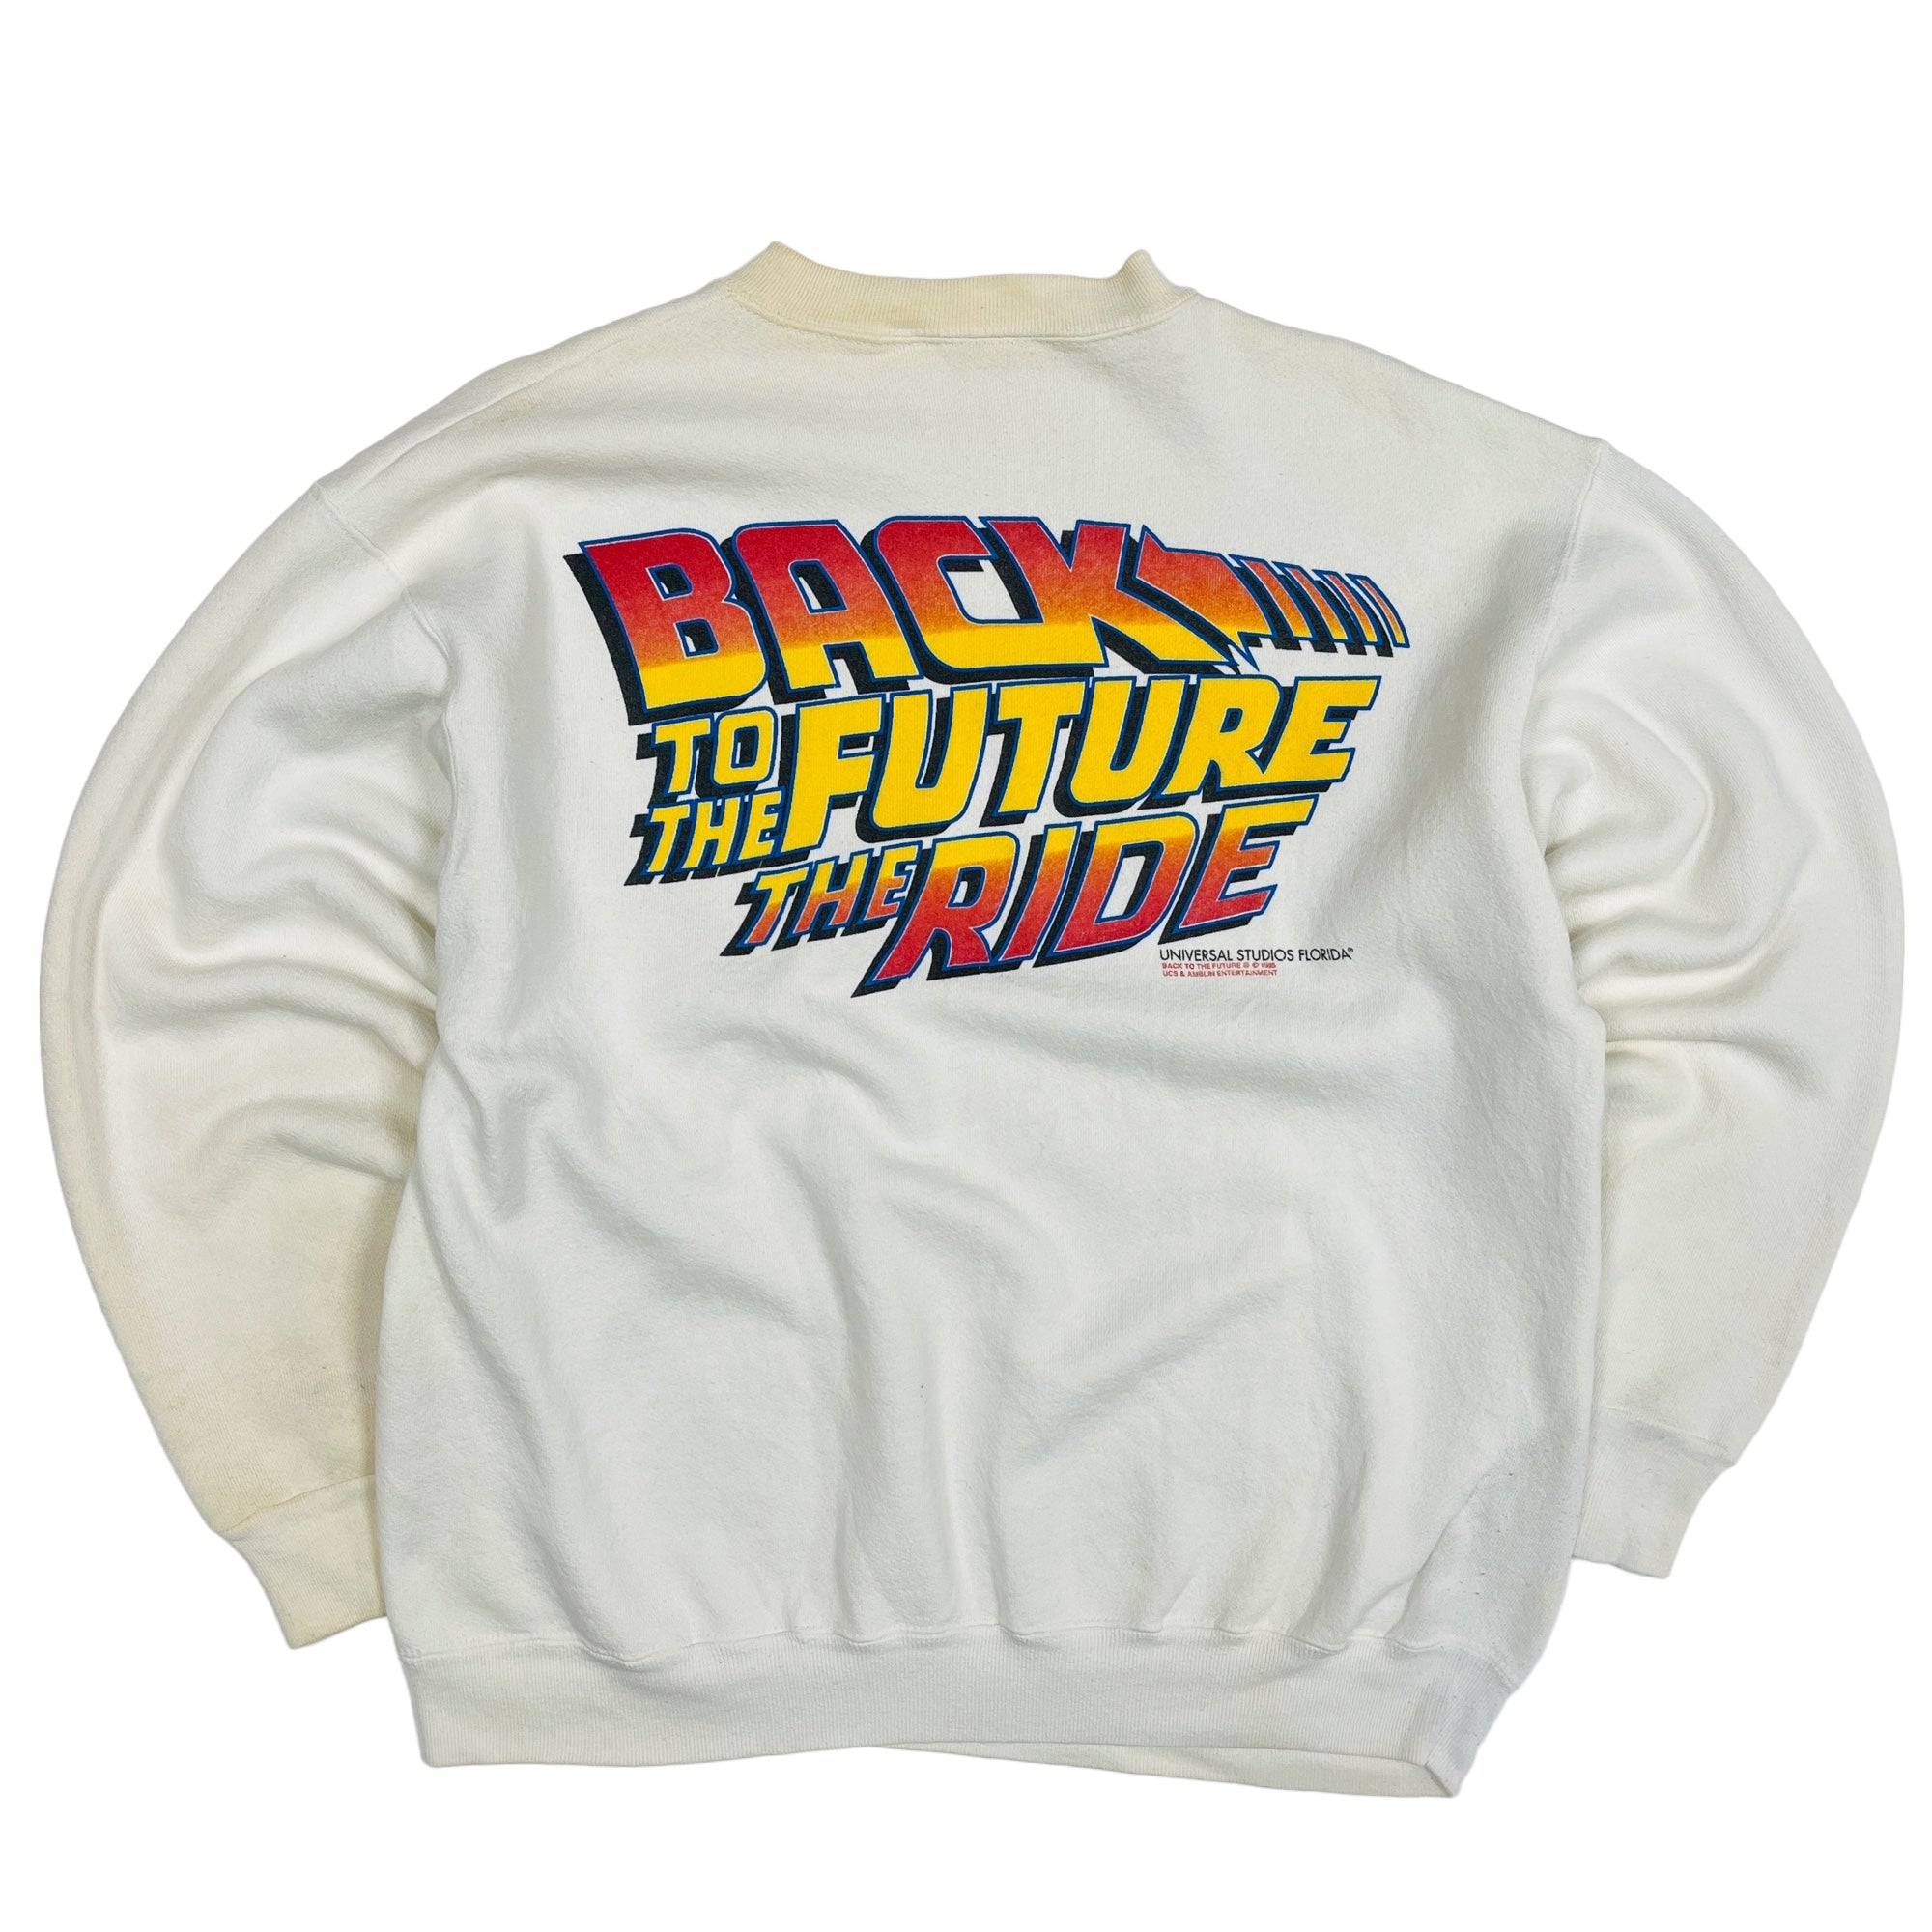 Back To The Future The Rider Universal Studios Graphic Sweatshirt - Large